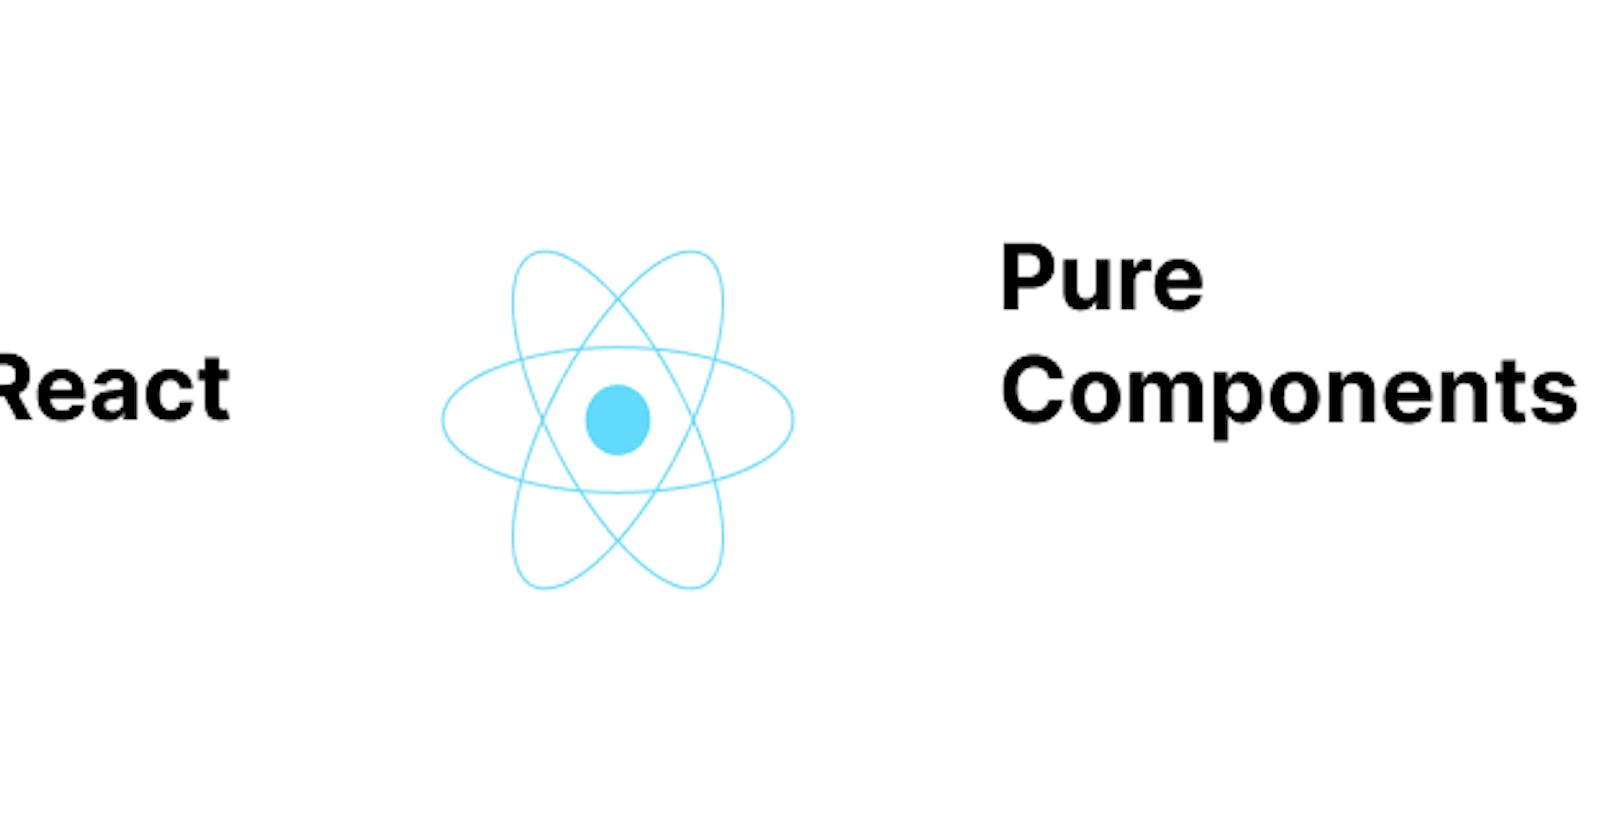 Pure Component in React